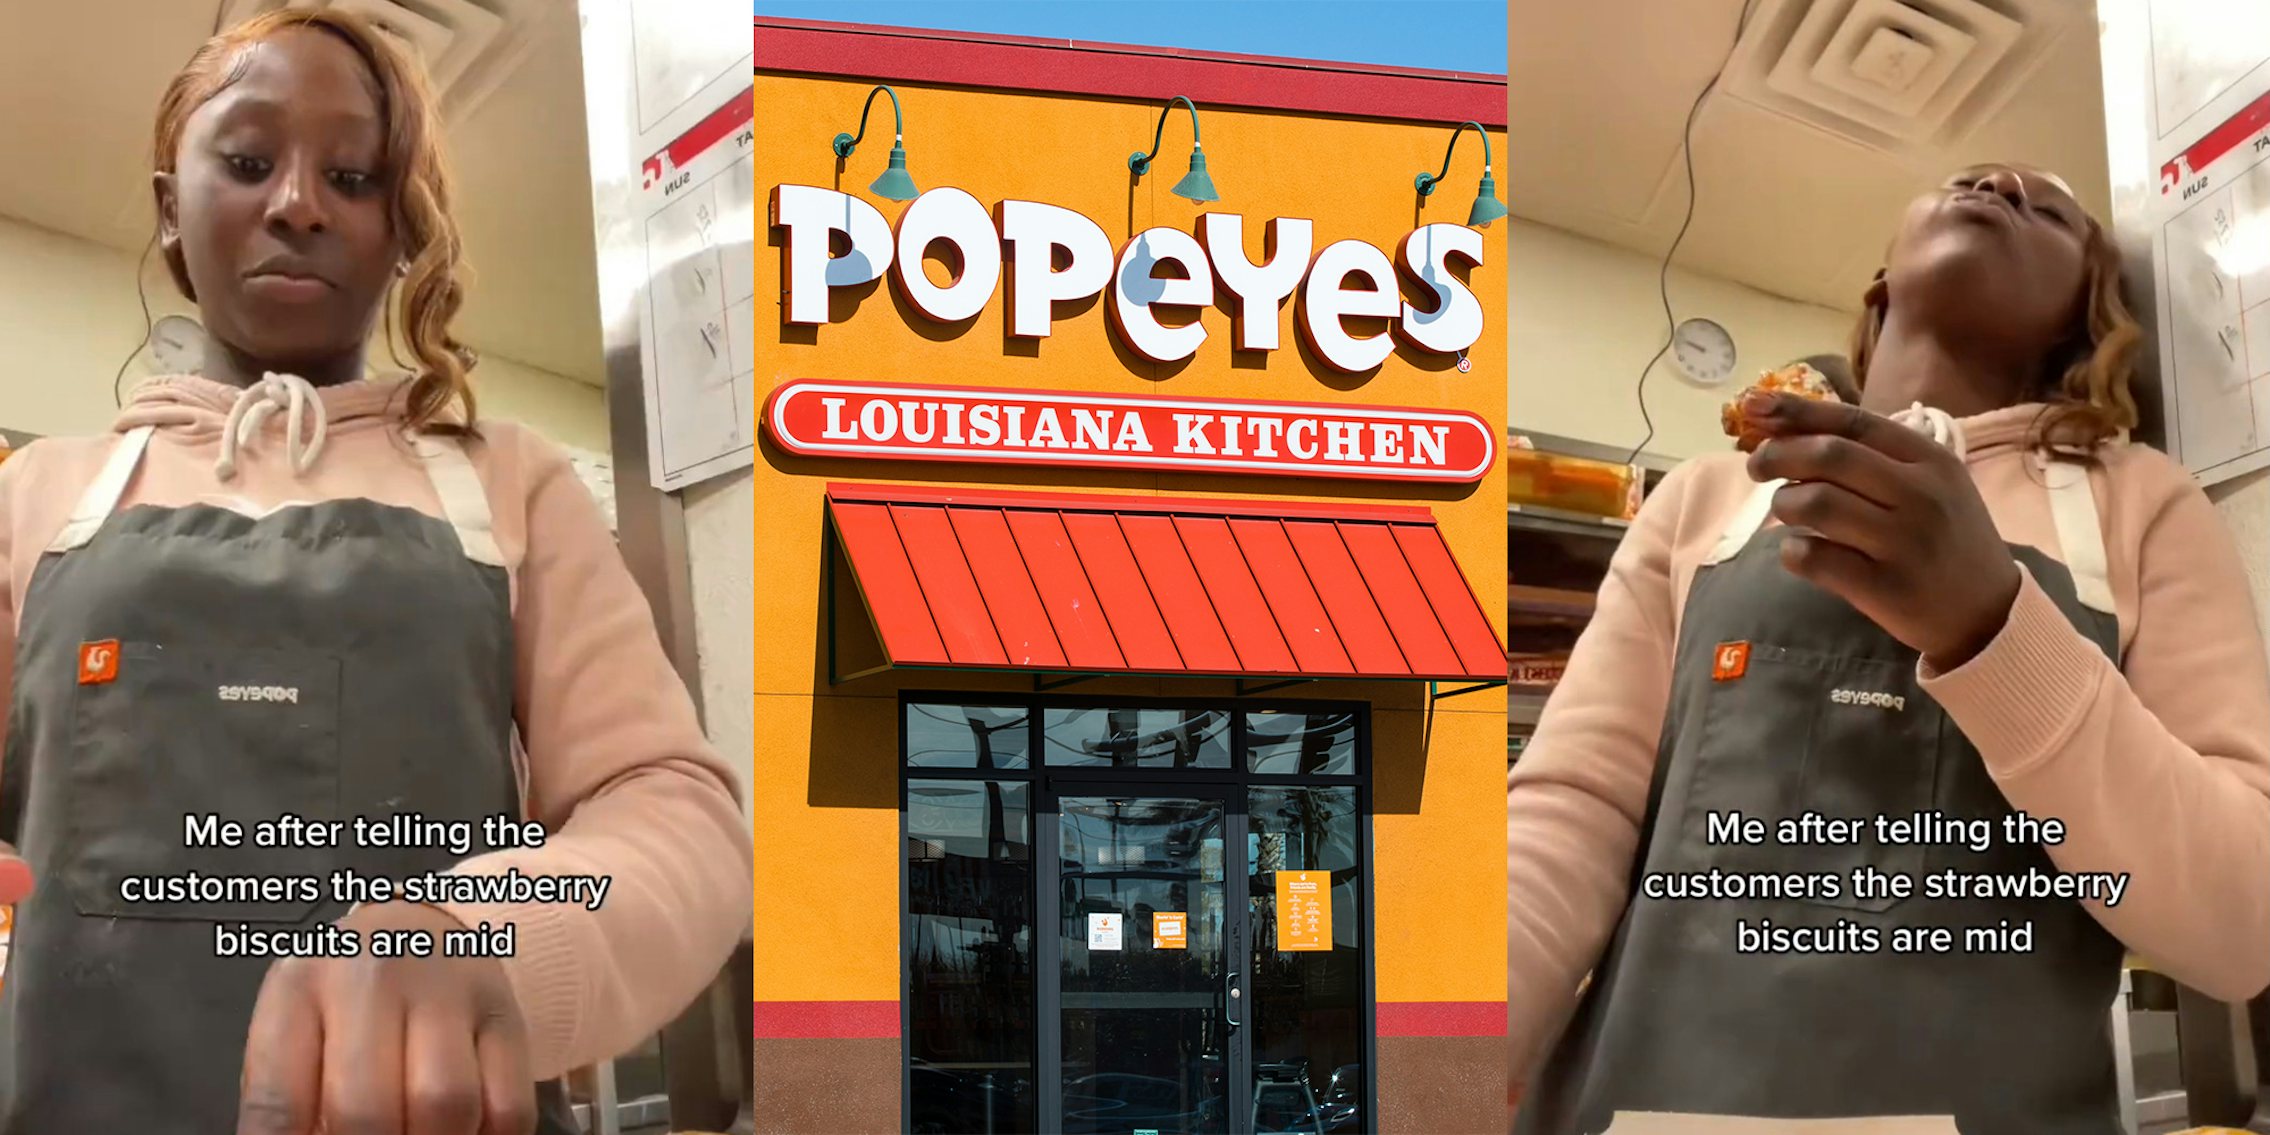 Popeye’s worker lies to customers about strawberry biscuits so she can eat them